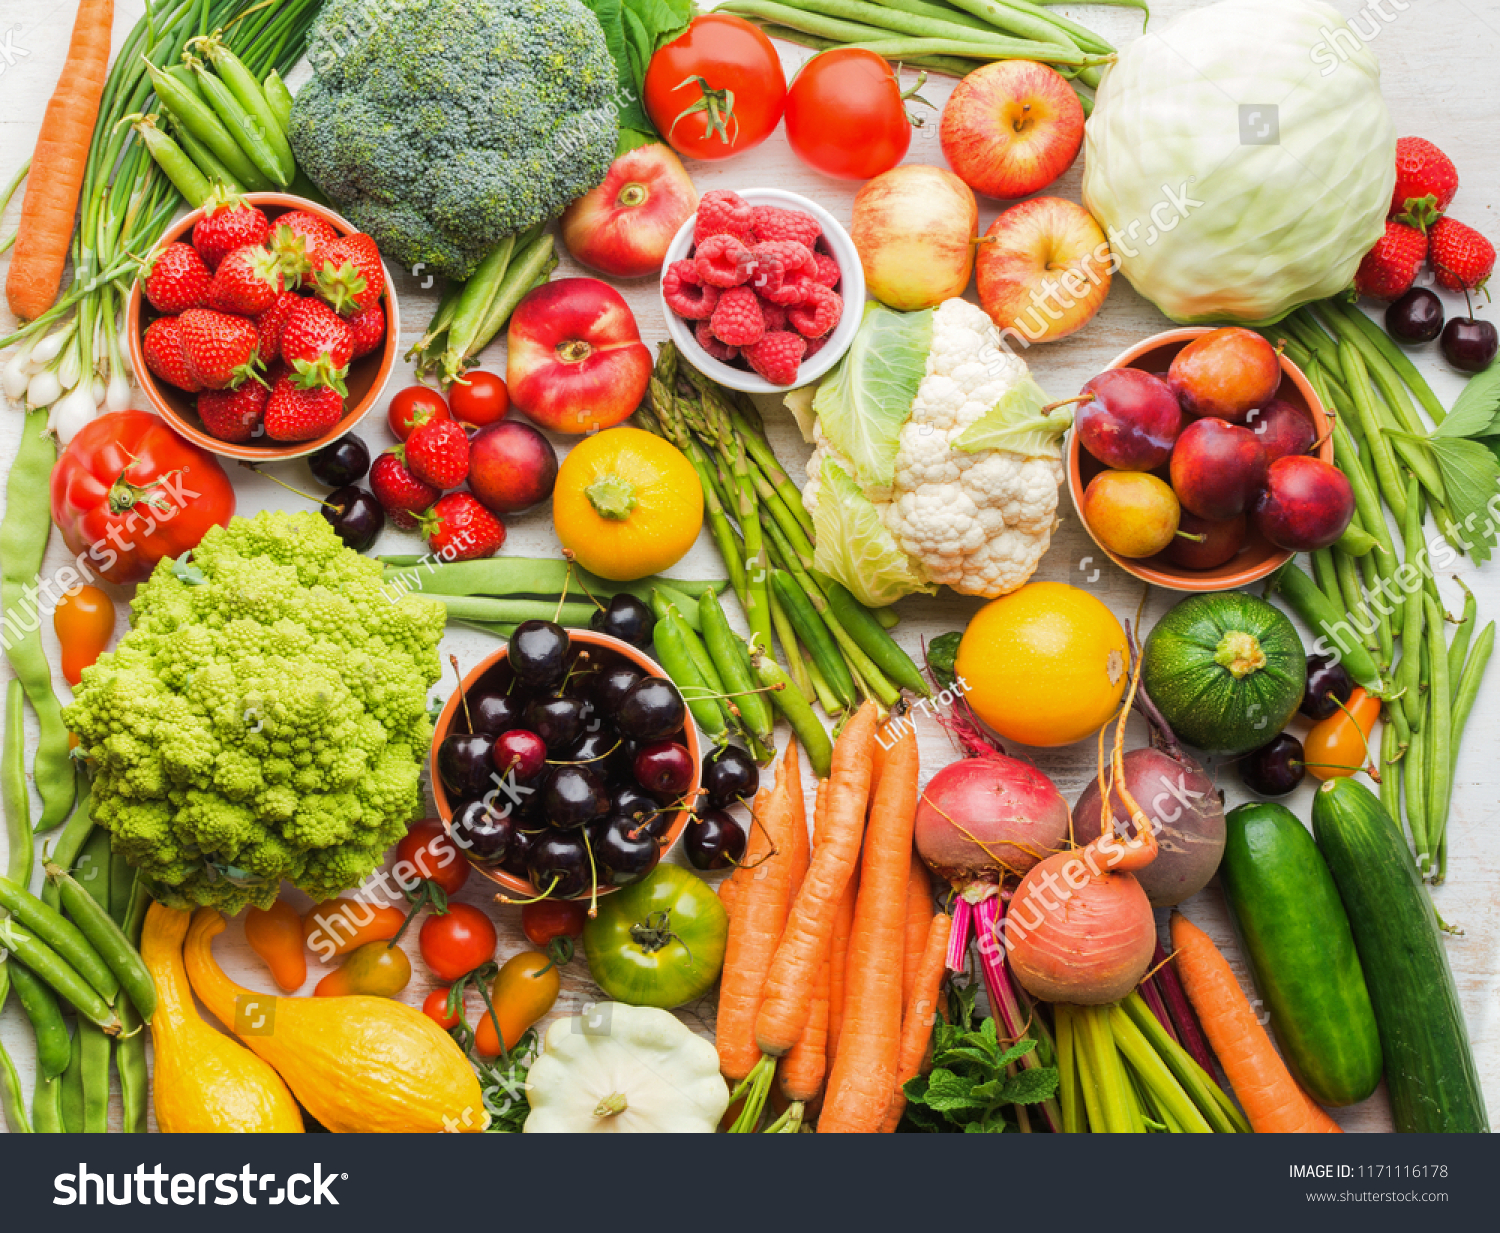 Summer fruits vegetables berries background, apples cherries peaches strawberries cabbage broccoli cauliflower squash tomatoes carrots spring onions beetroot, copy space, top view, selective focus #1171116178